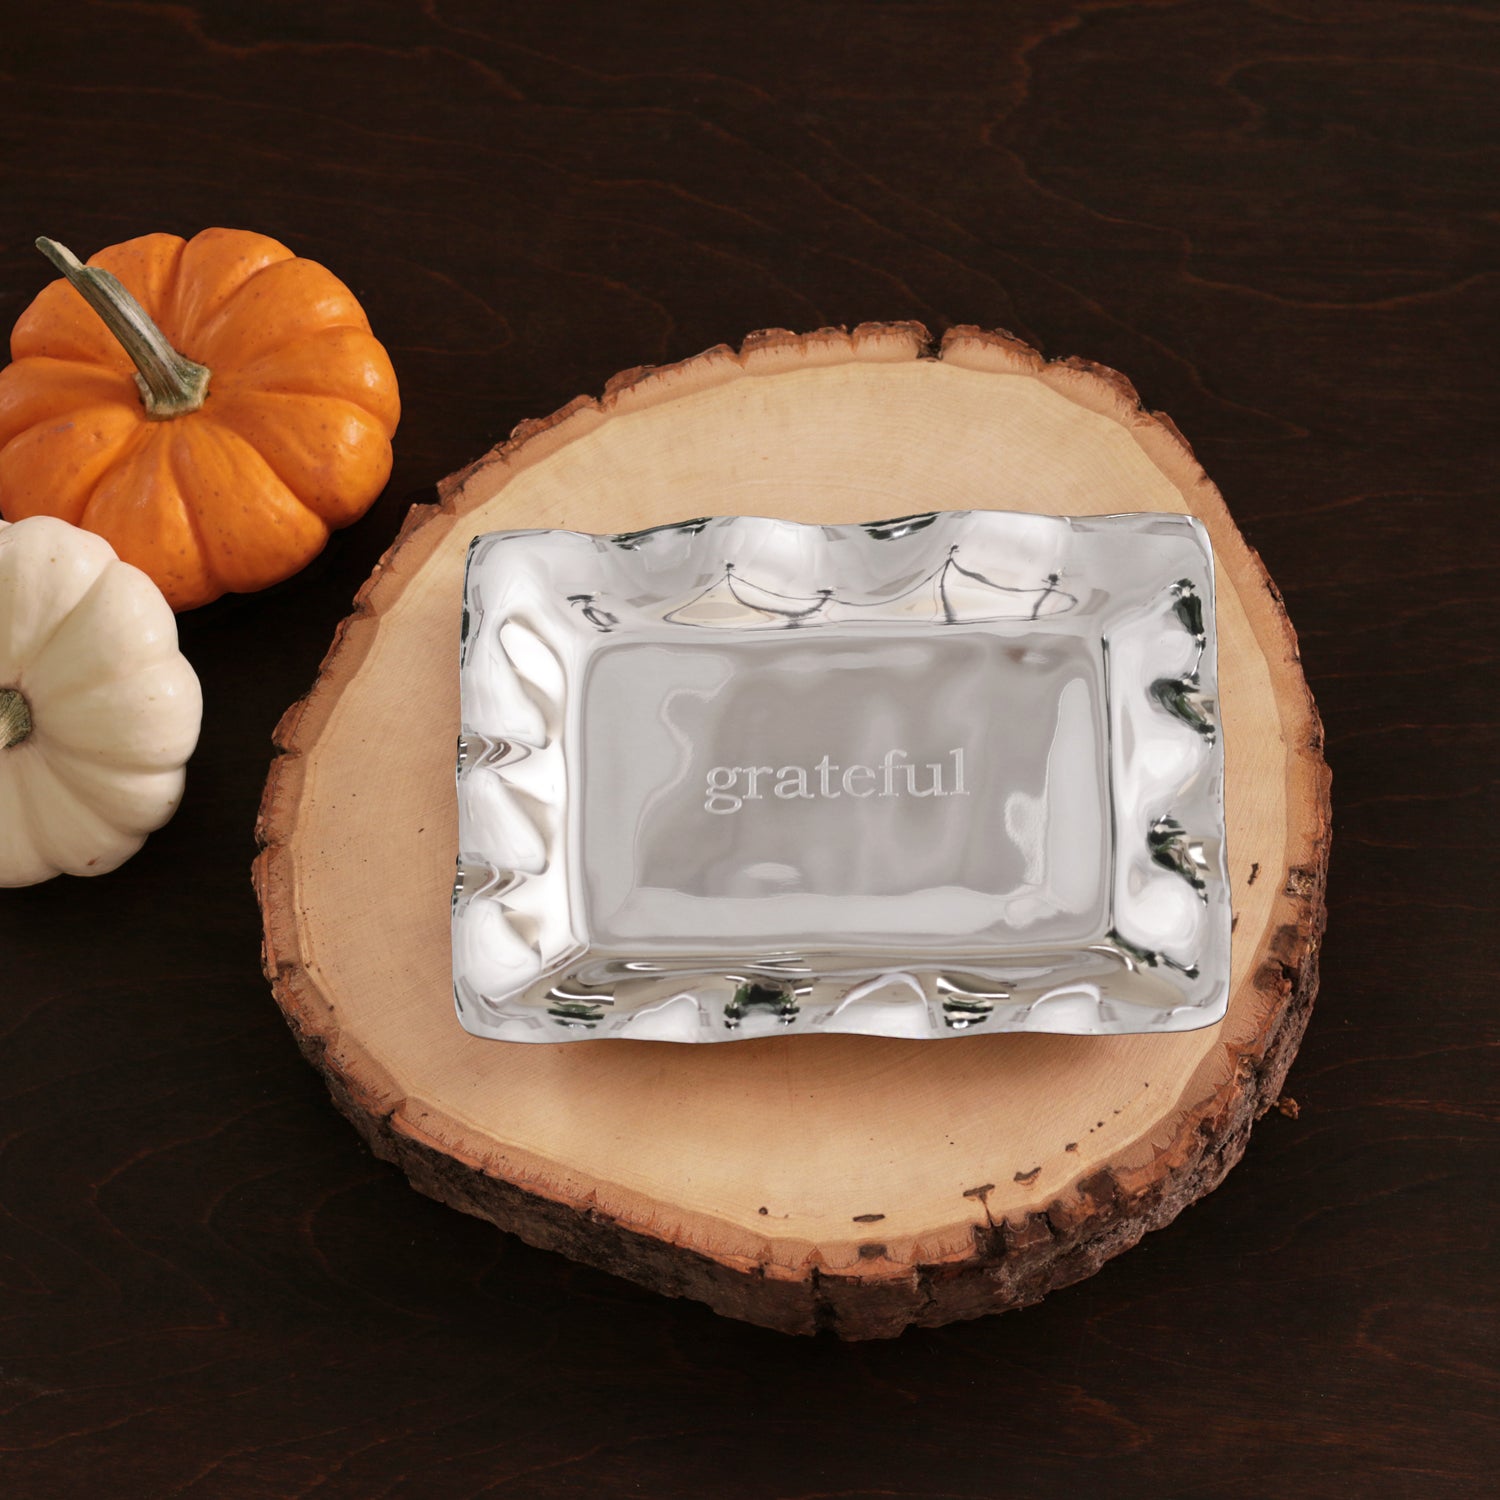 GIFTABLES Vento Rectangular Engraved Tray (&quot;grateful&quot;)